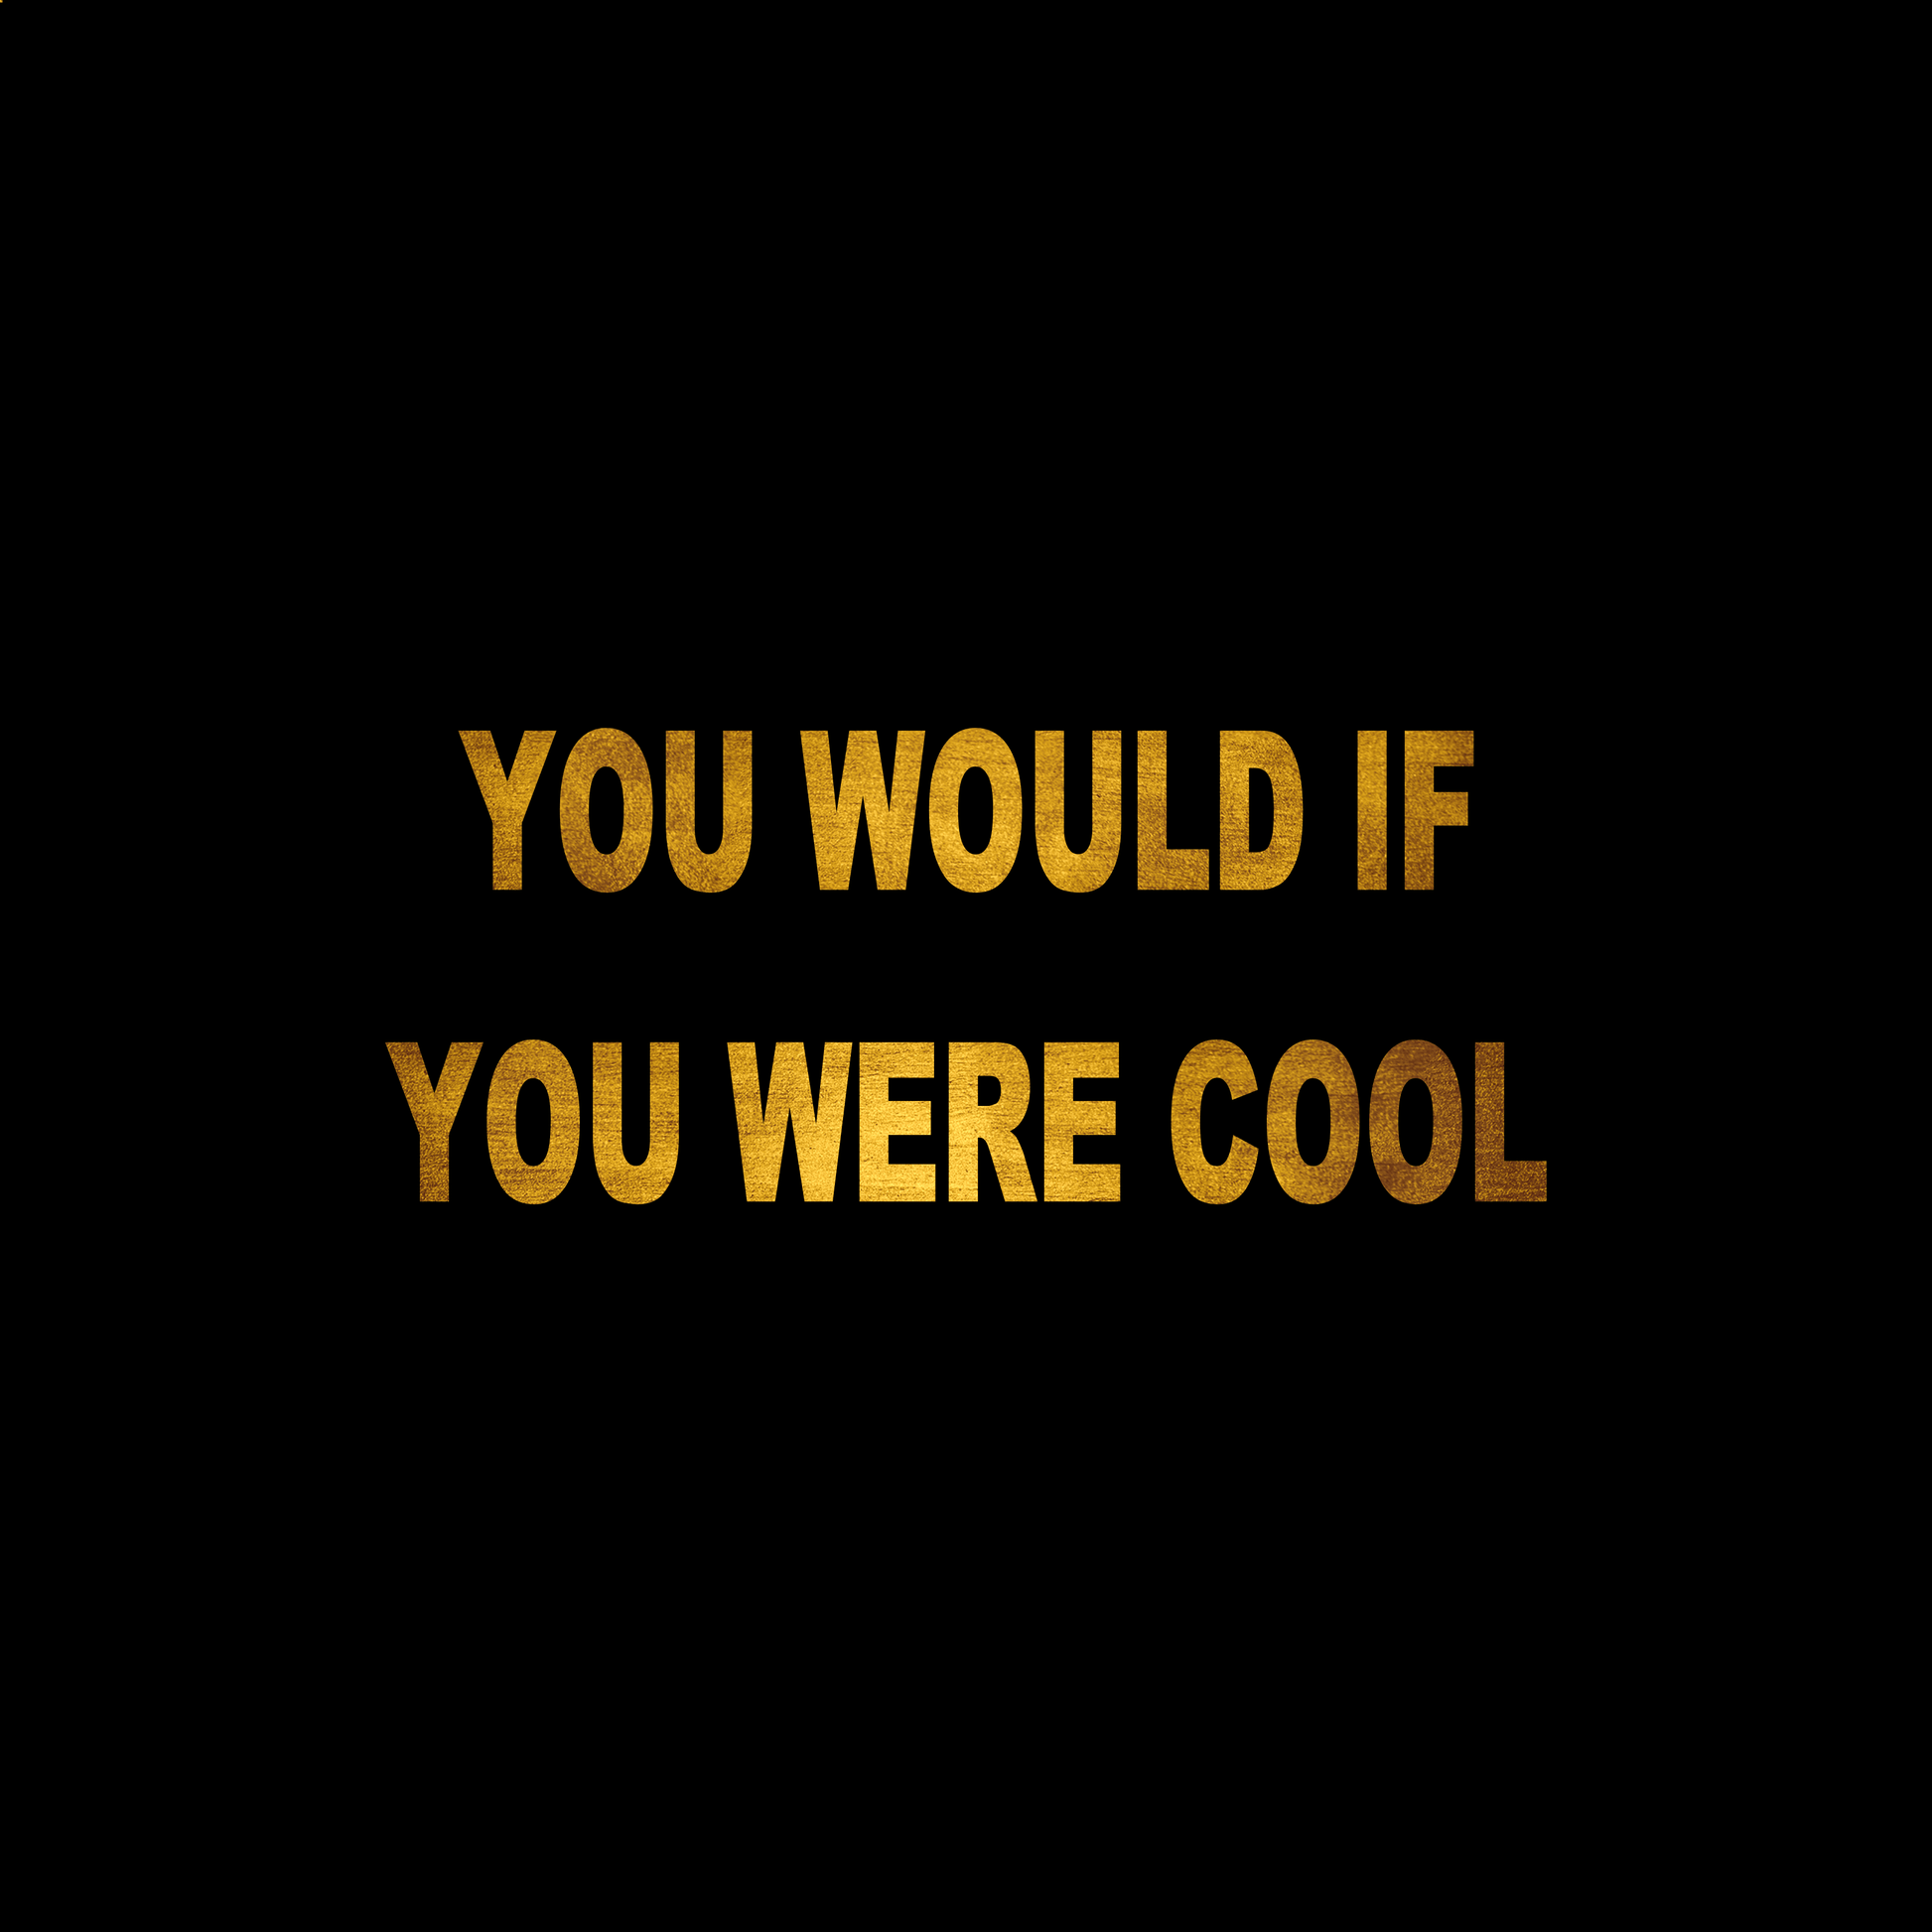 You would if you were cool sticker decal